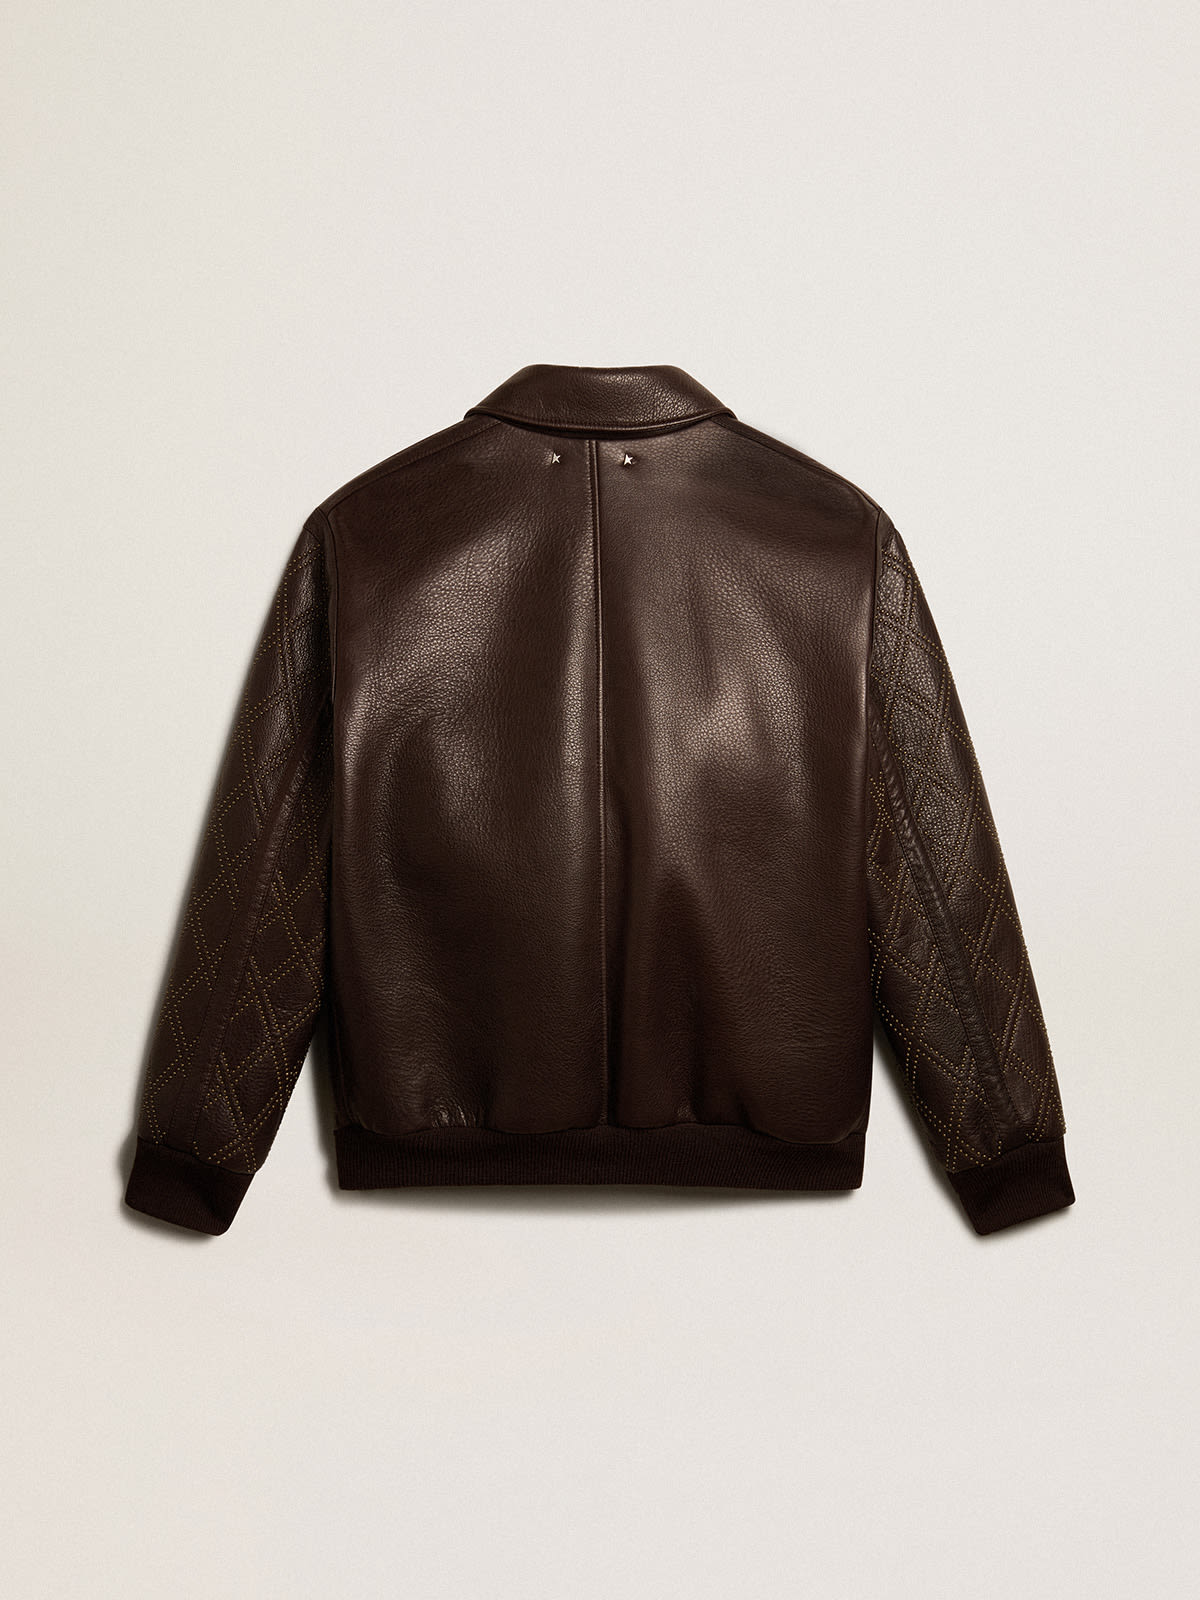 Golden Goose - Brown nappa leather jacket with studded sleeves in 